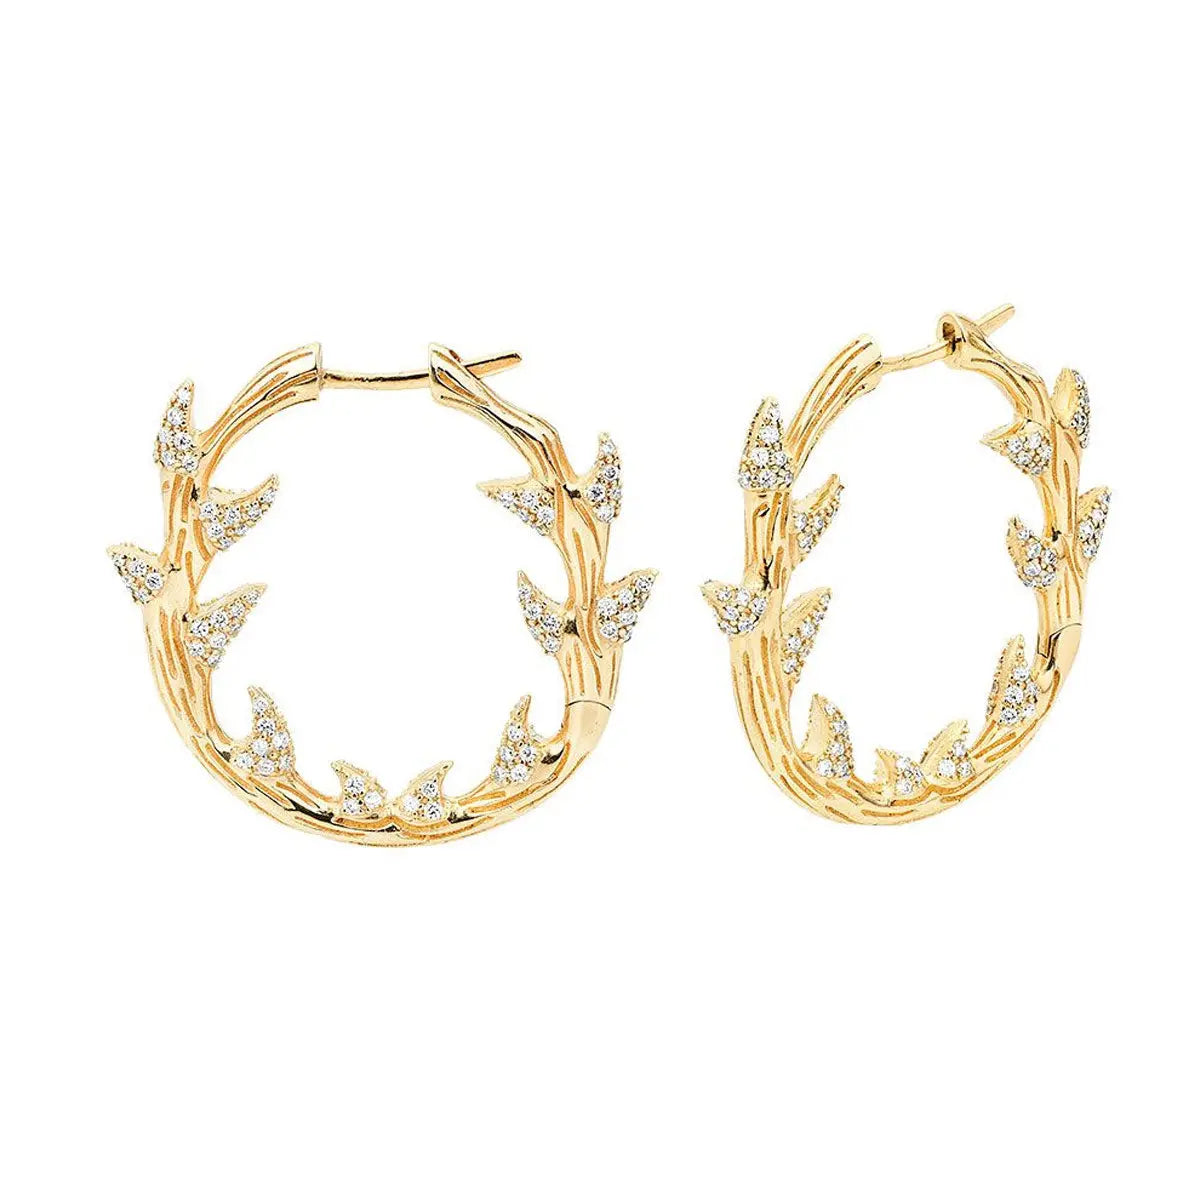 18k hinged hoops with 15 grams plus of gold and almost a carat and a half of diamonds in an intricate and edgy hoop design.  Designed by Feral Jewelry